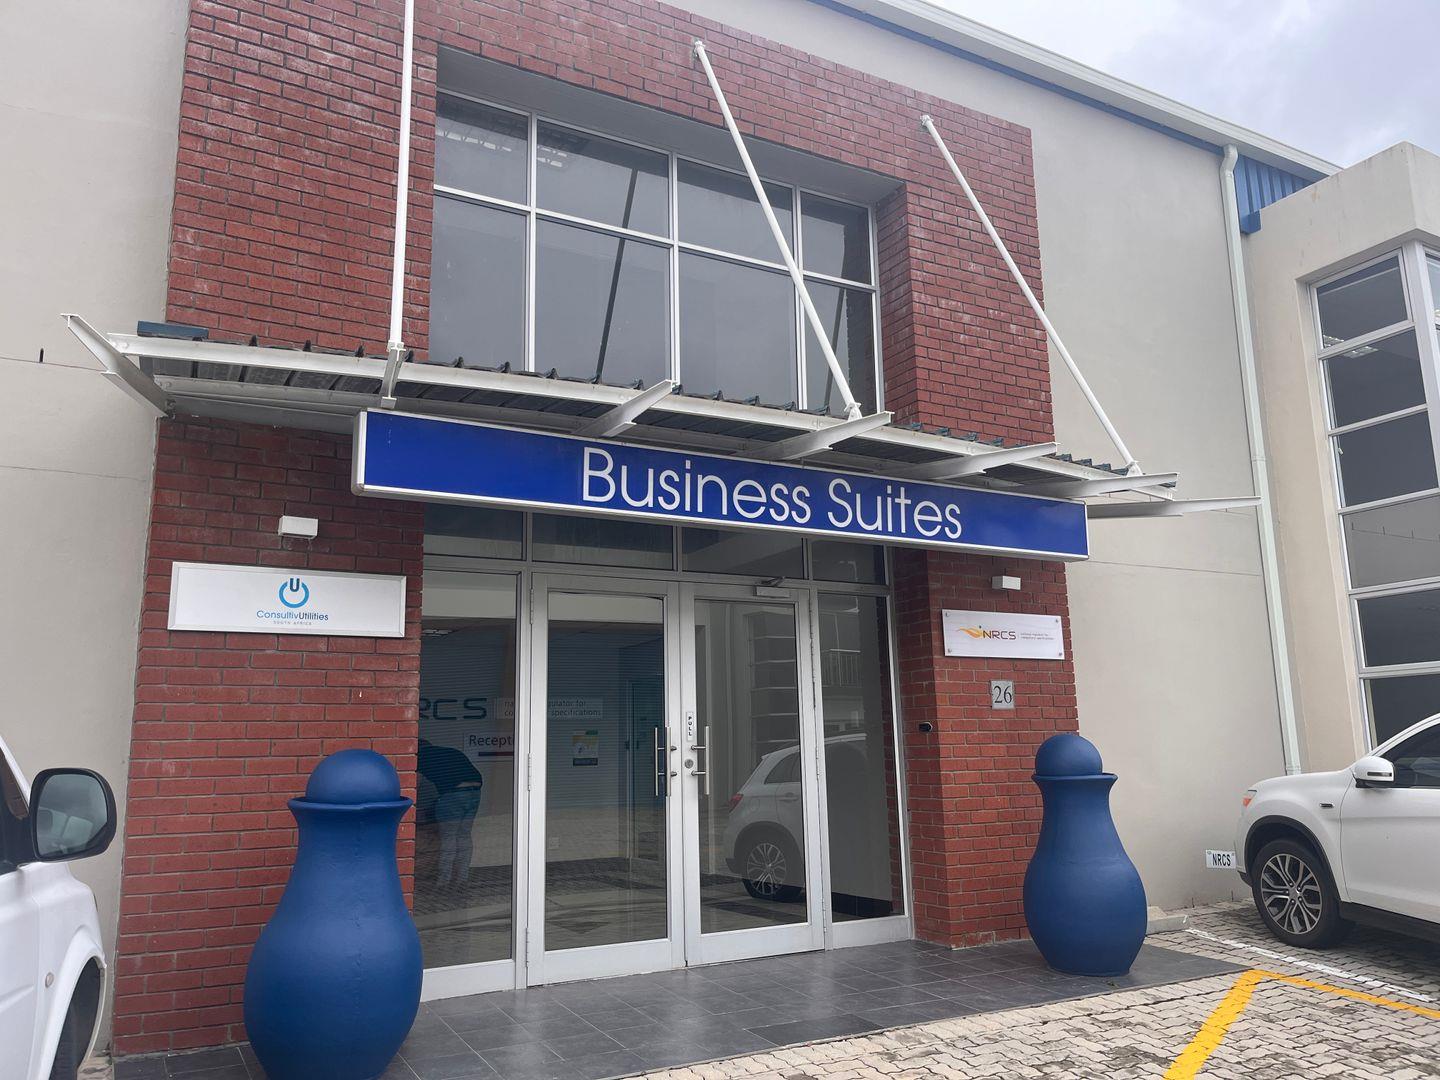 Commercial property to rent in Fairview - Willow Road Business Park, 141 Willow Road